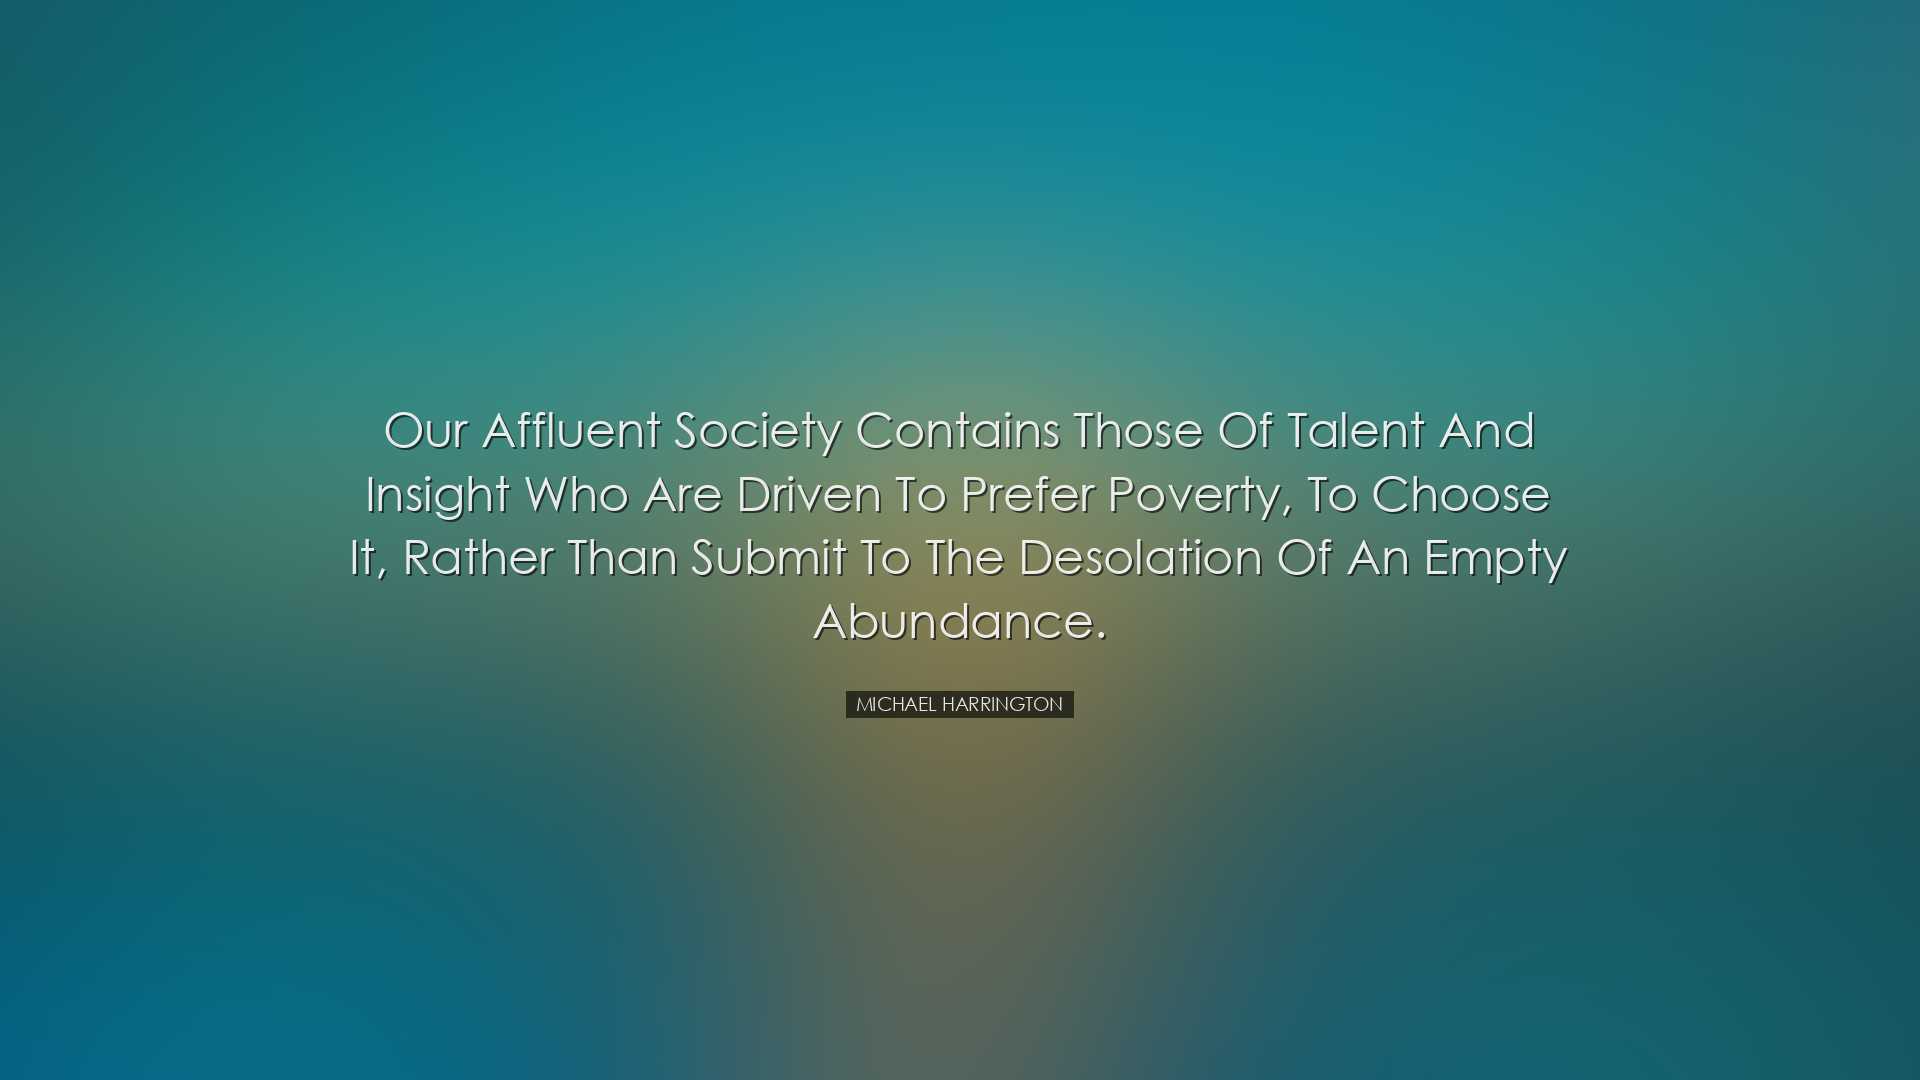 Our affluent society contains those of talent and insight who are